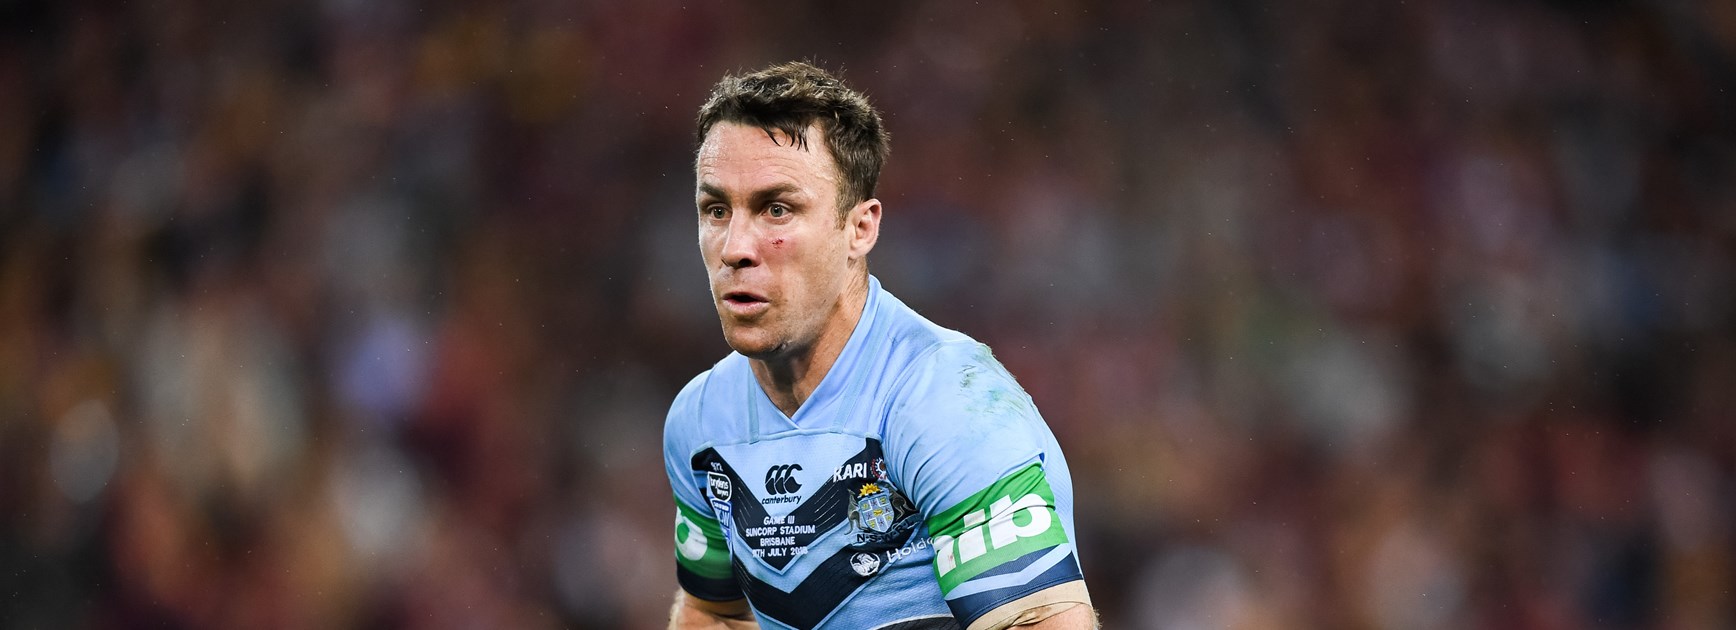 The omen the Panthers desperately need: Fittler